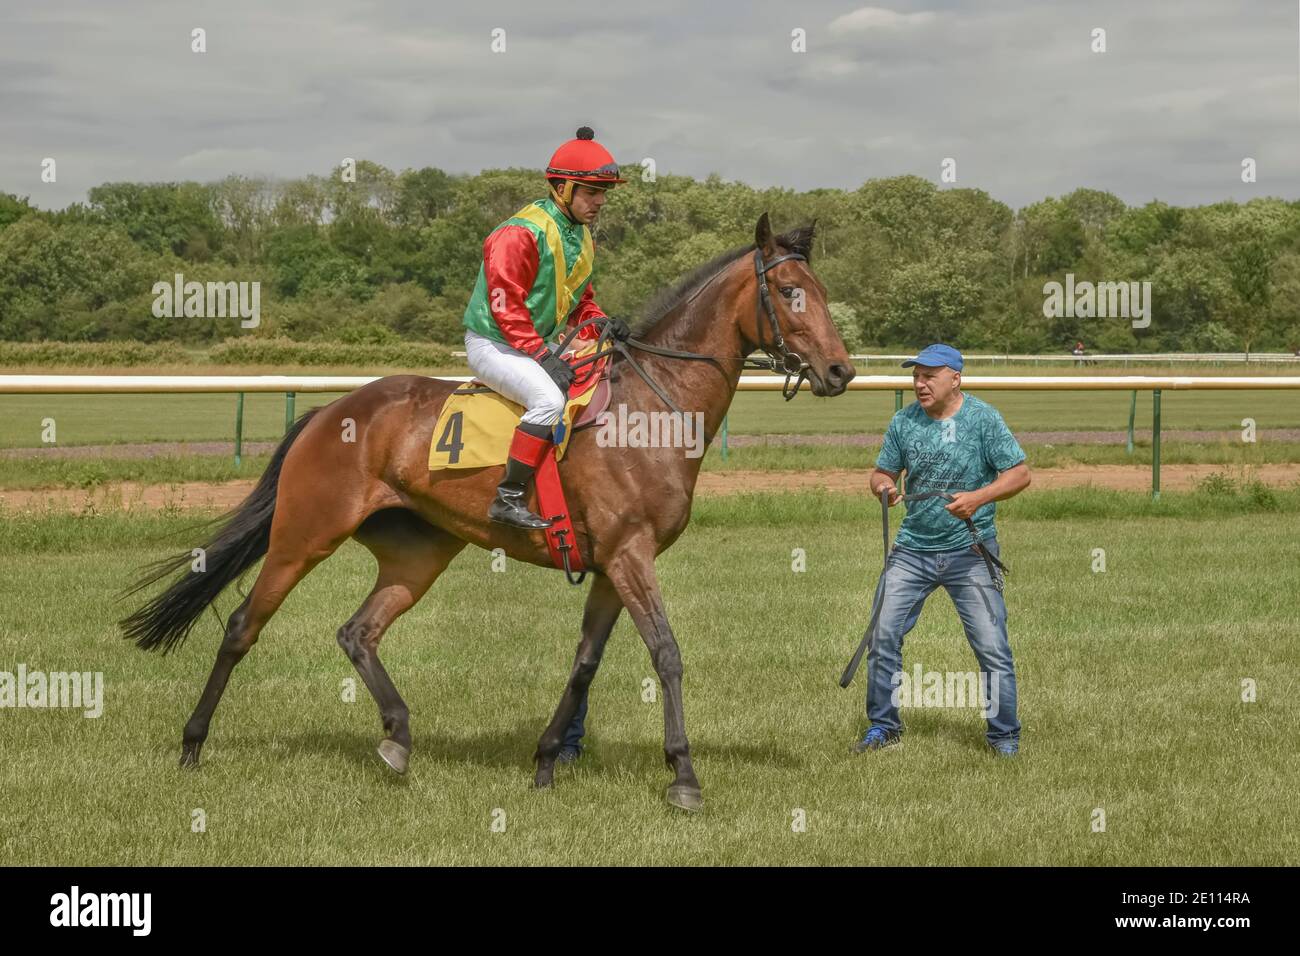 Magdeburg, Germany - 24 June 2017: Jockey warms the red horse before the race und tries to calm the horse down. Race track in Magdeburg Stock Photo